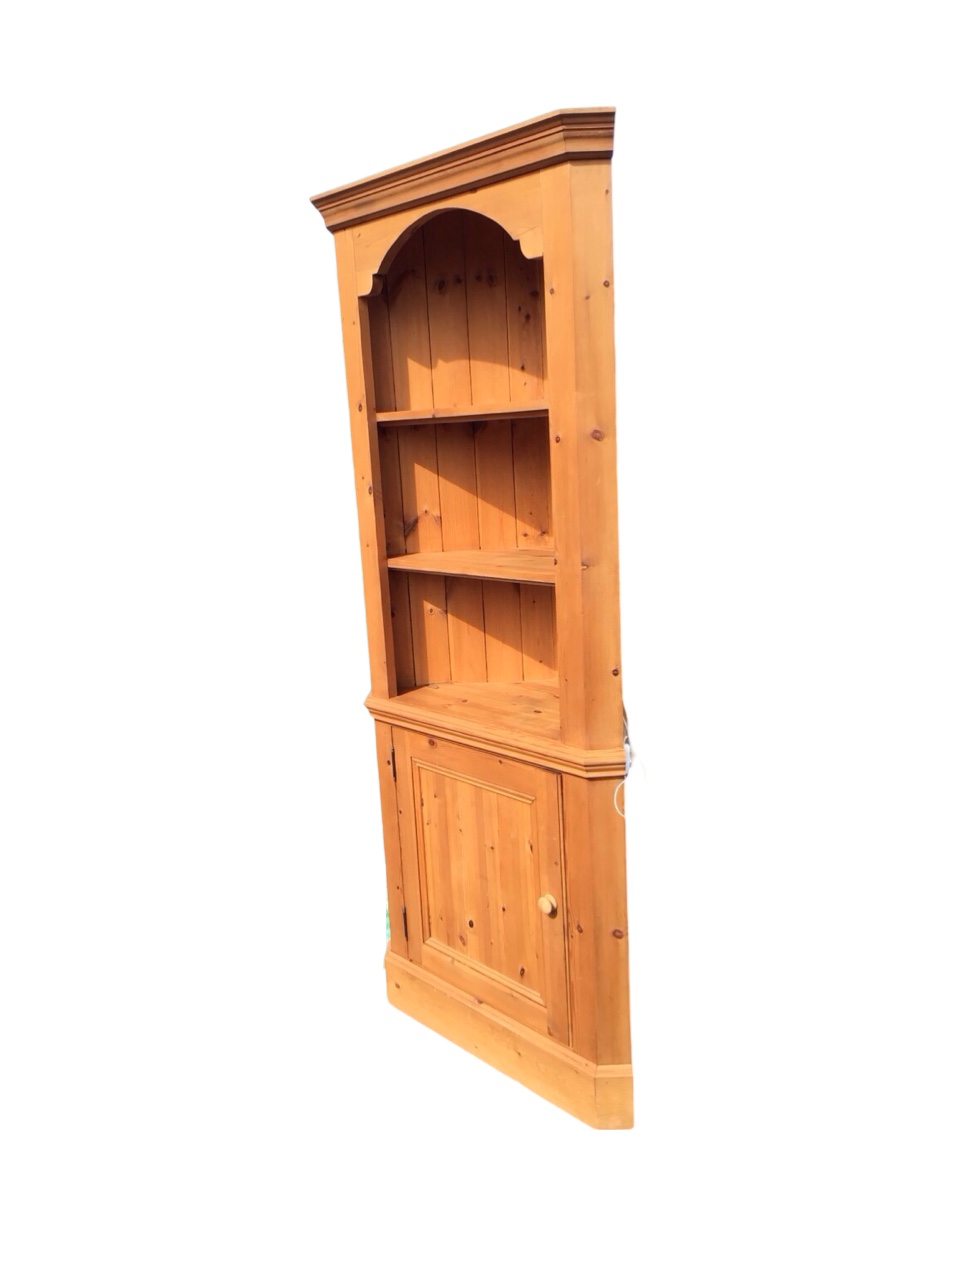 A Victorian style pine corner cabinet with moulded cornice above open shelves and a knobbed